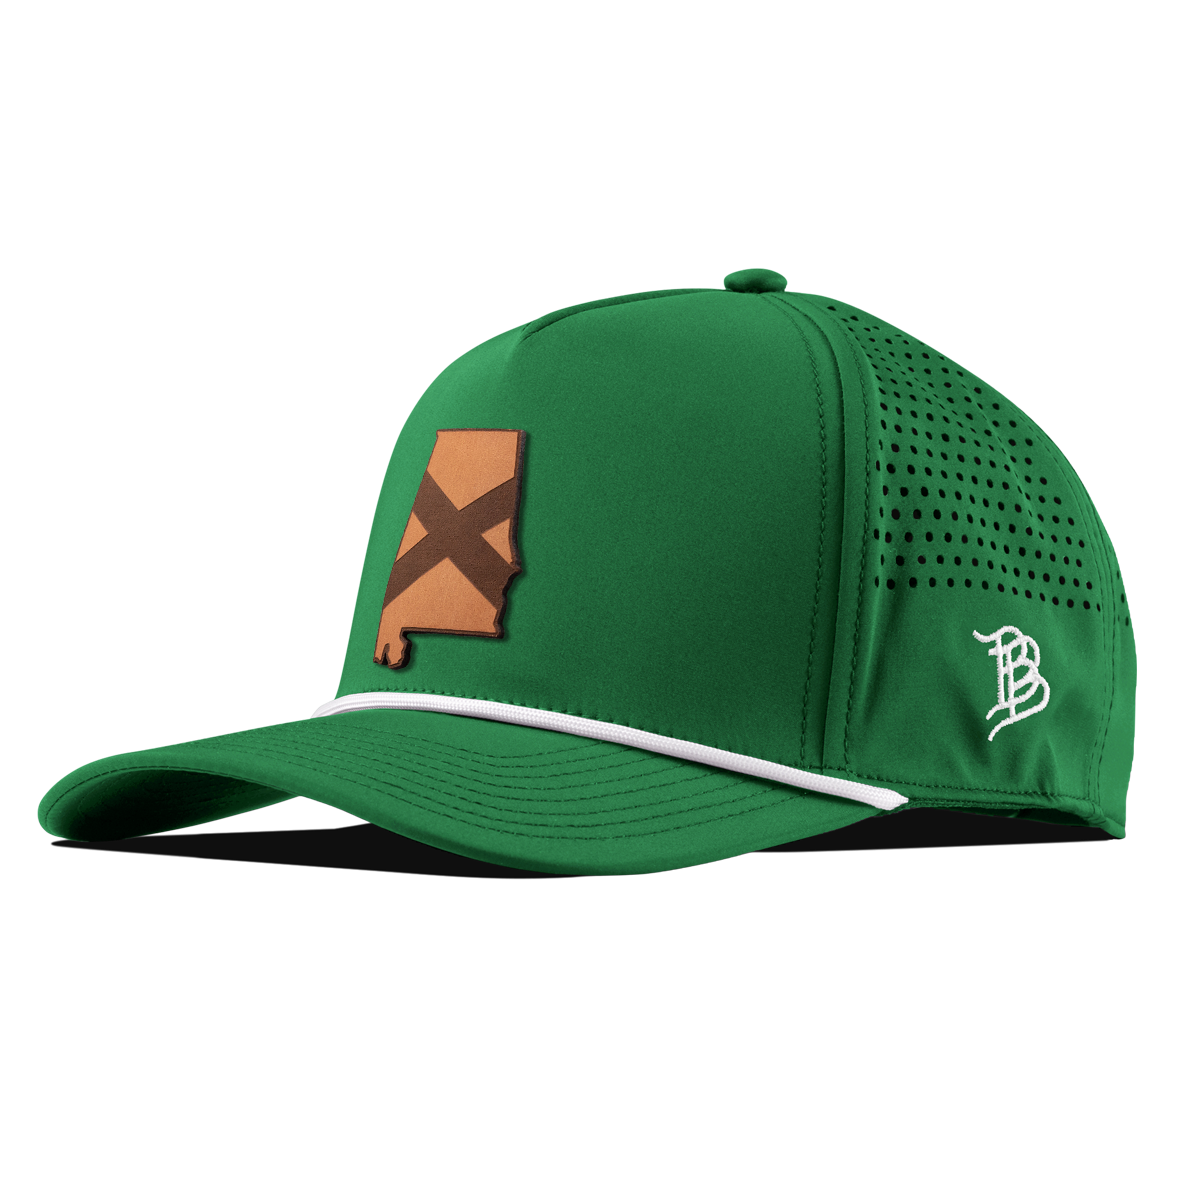 Alabama 22 Curved 5 Panel Rope Kelly Green